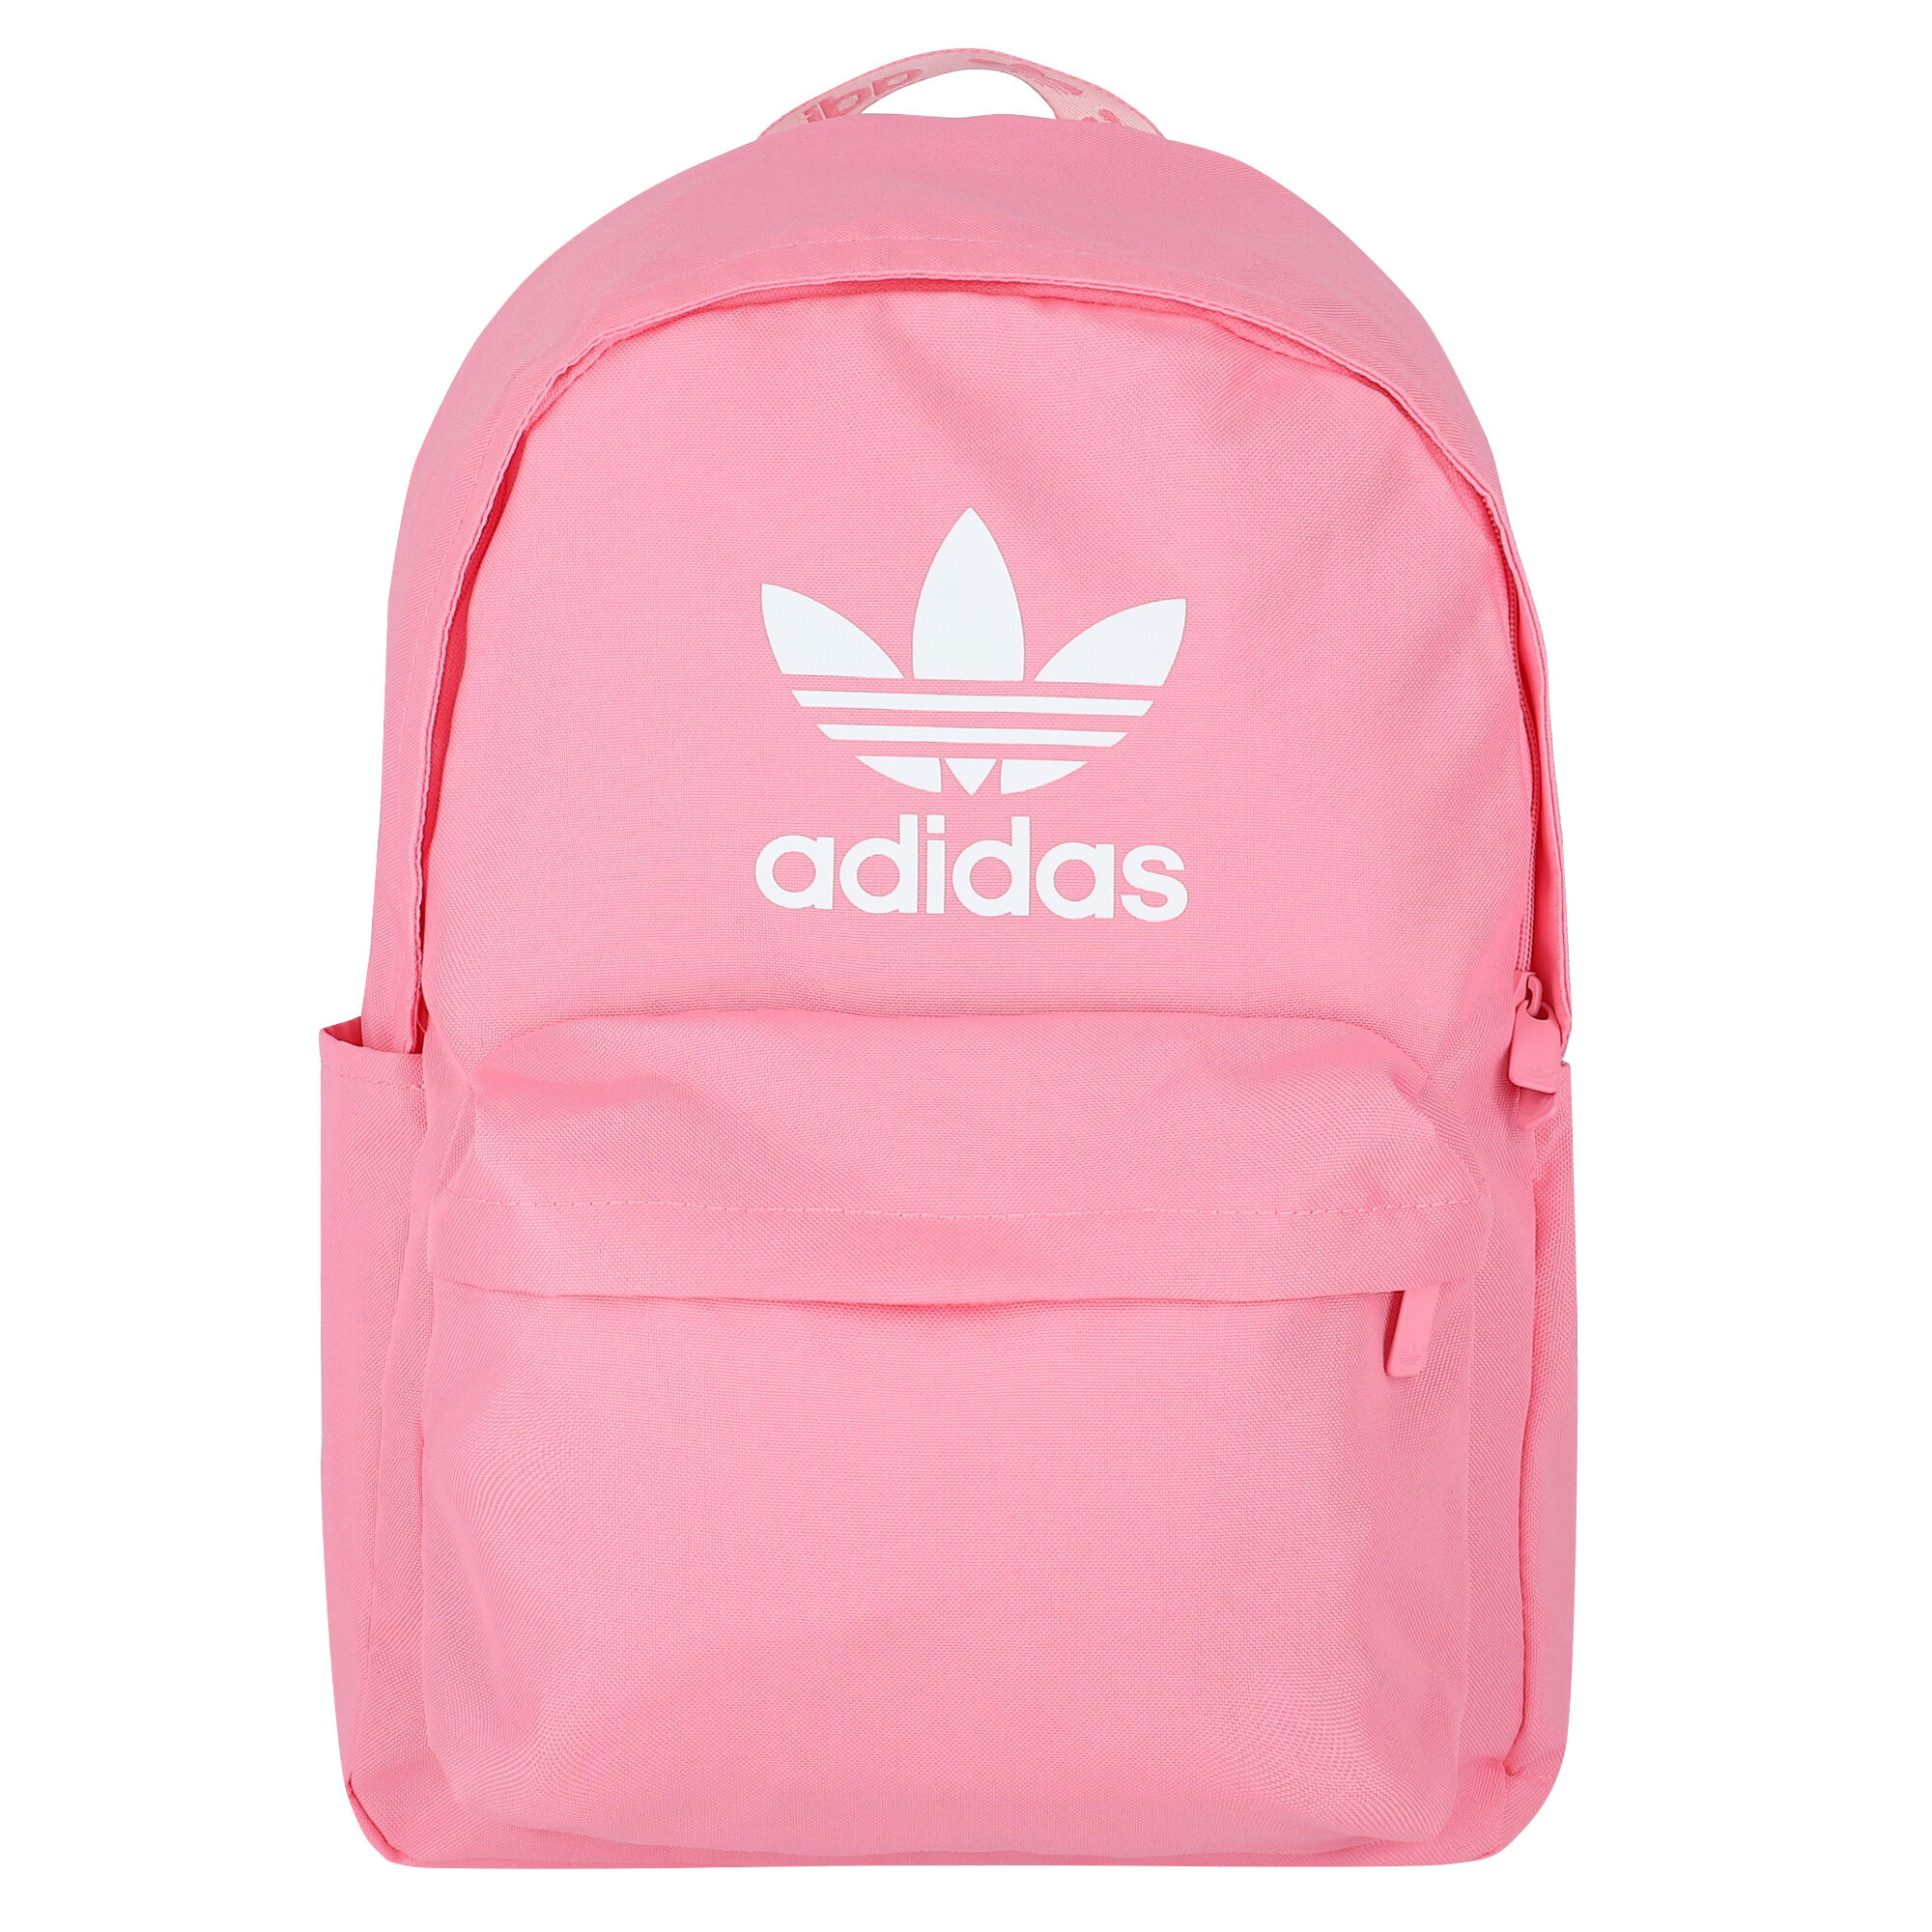 Back to School Bags | adidas US